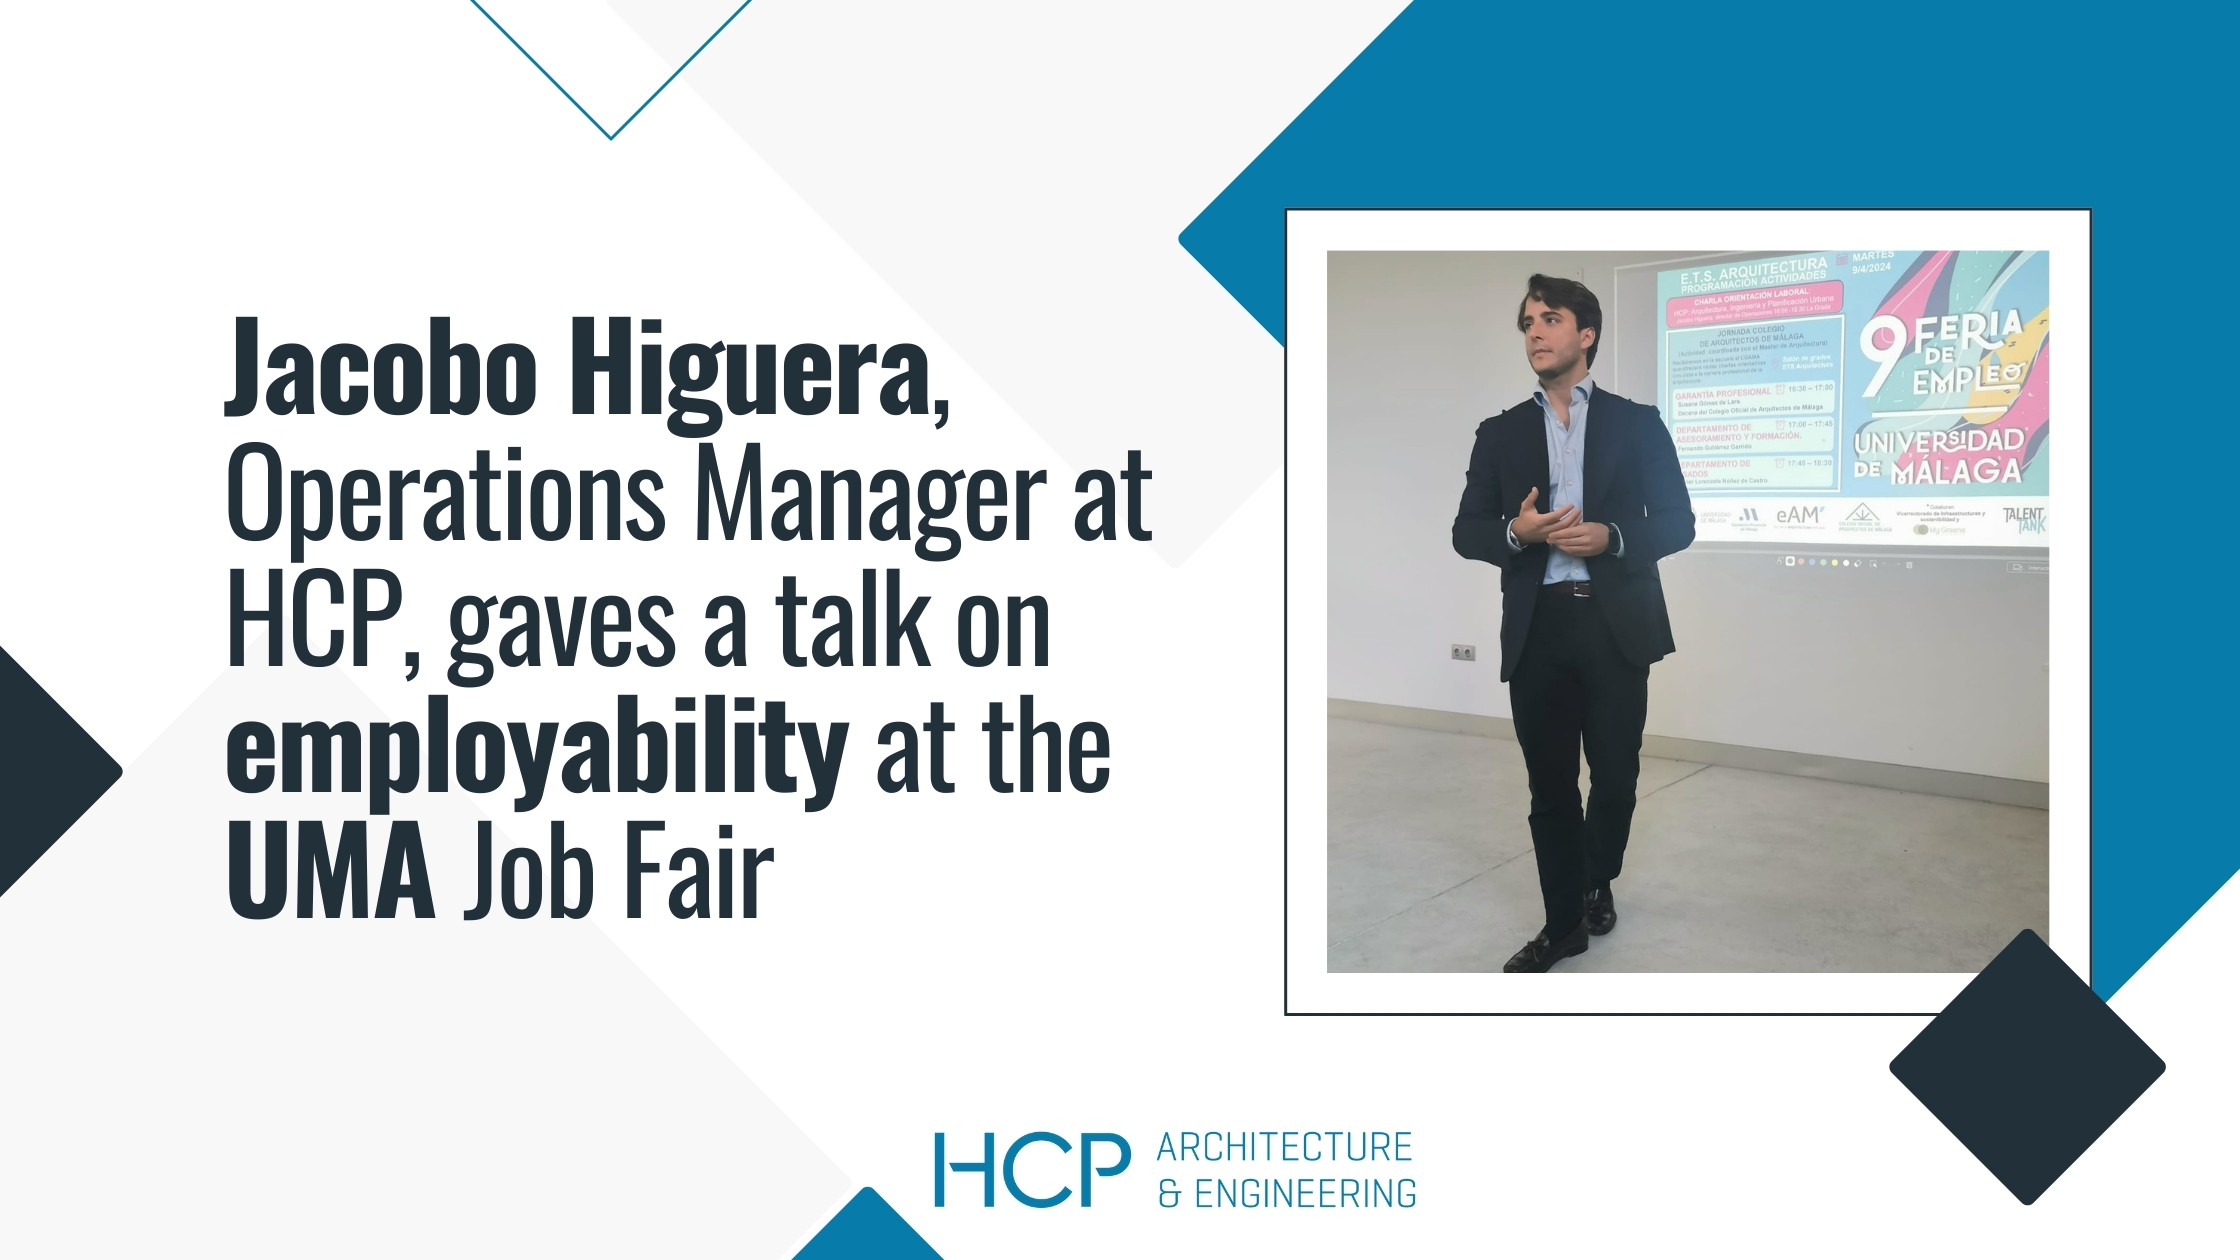 HCP attends the Employment Fair at the University of Malaga to talk about employability